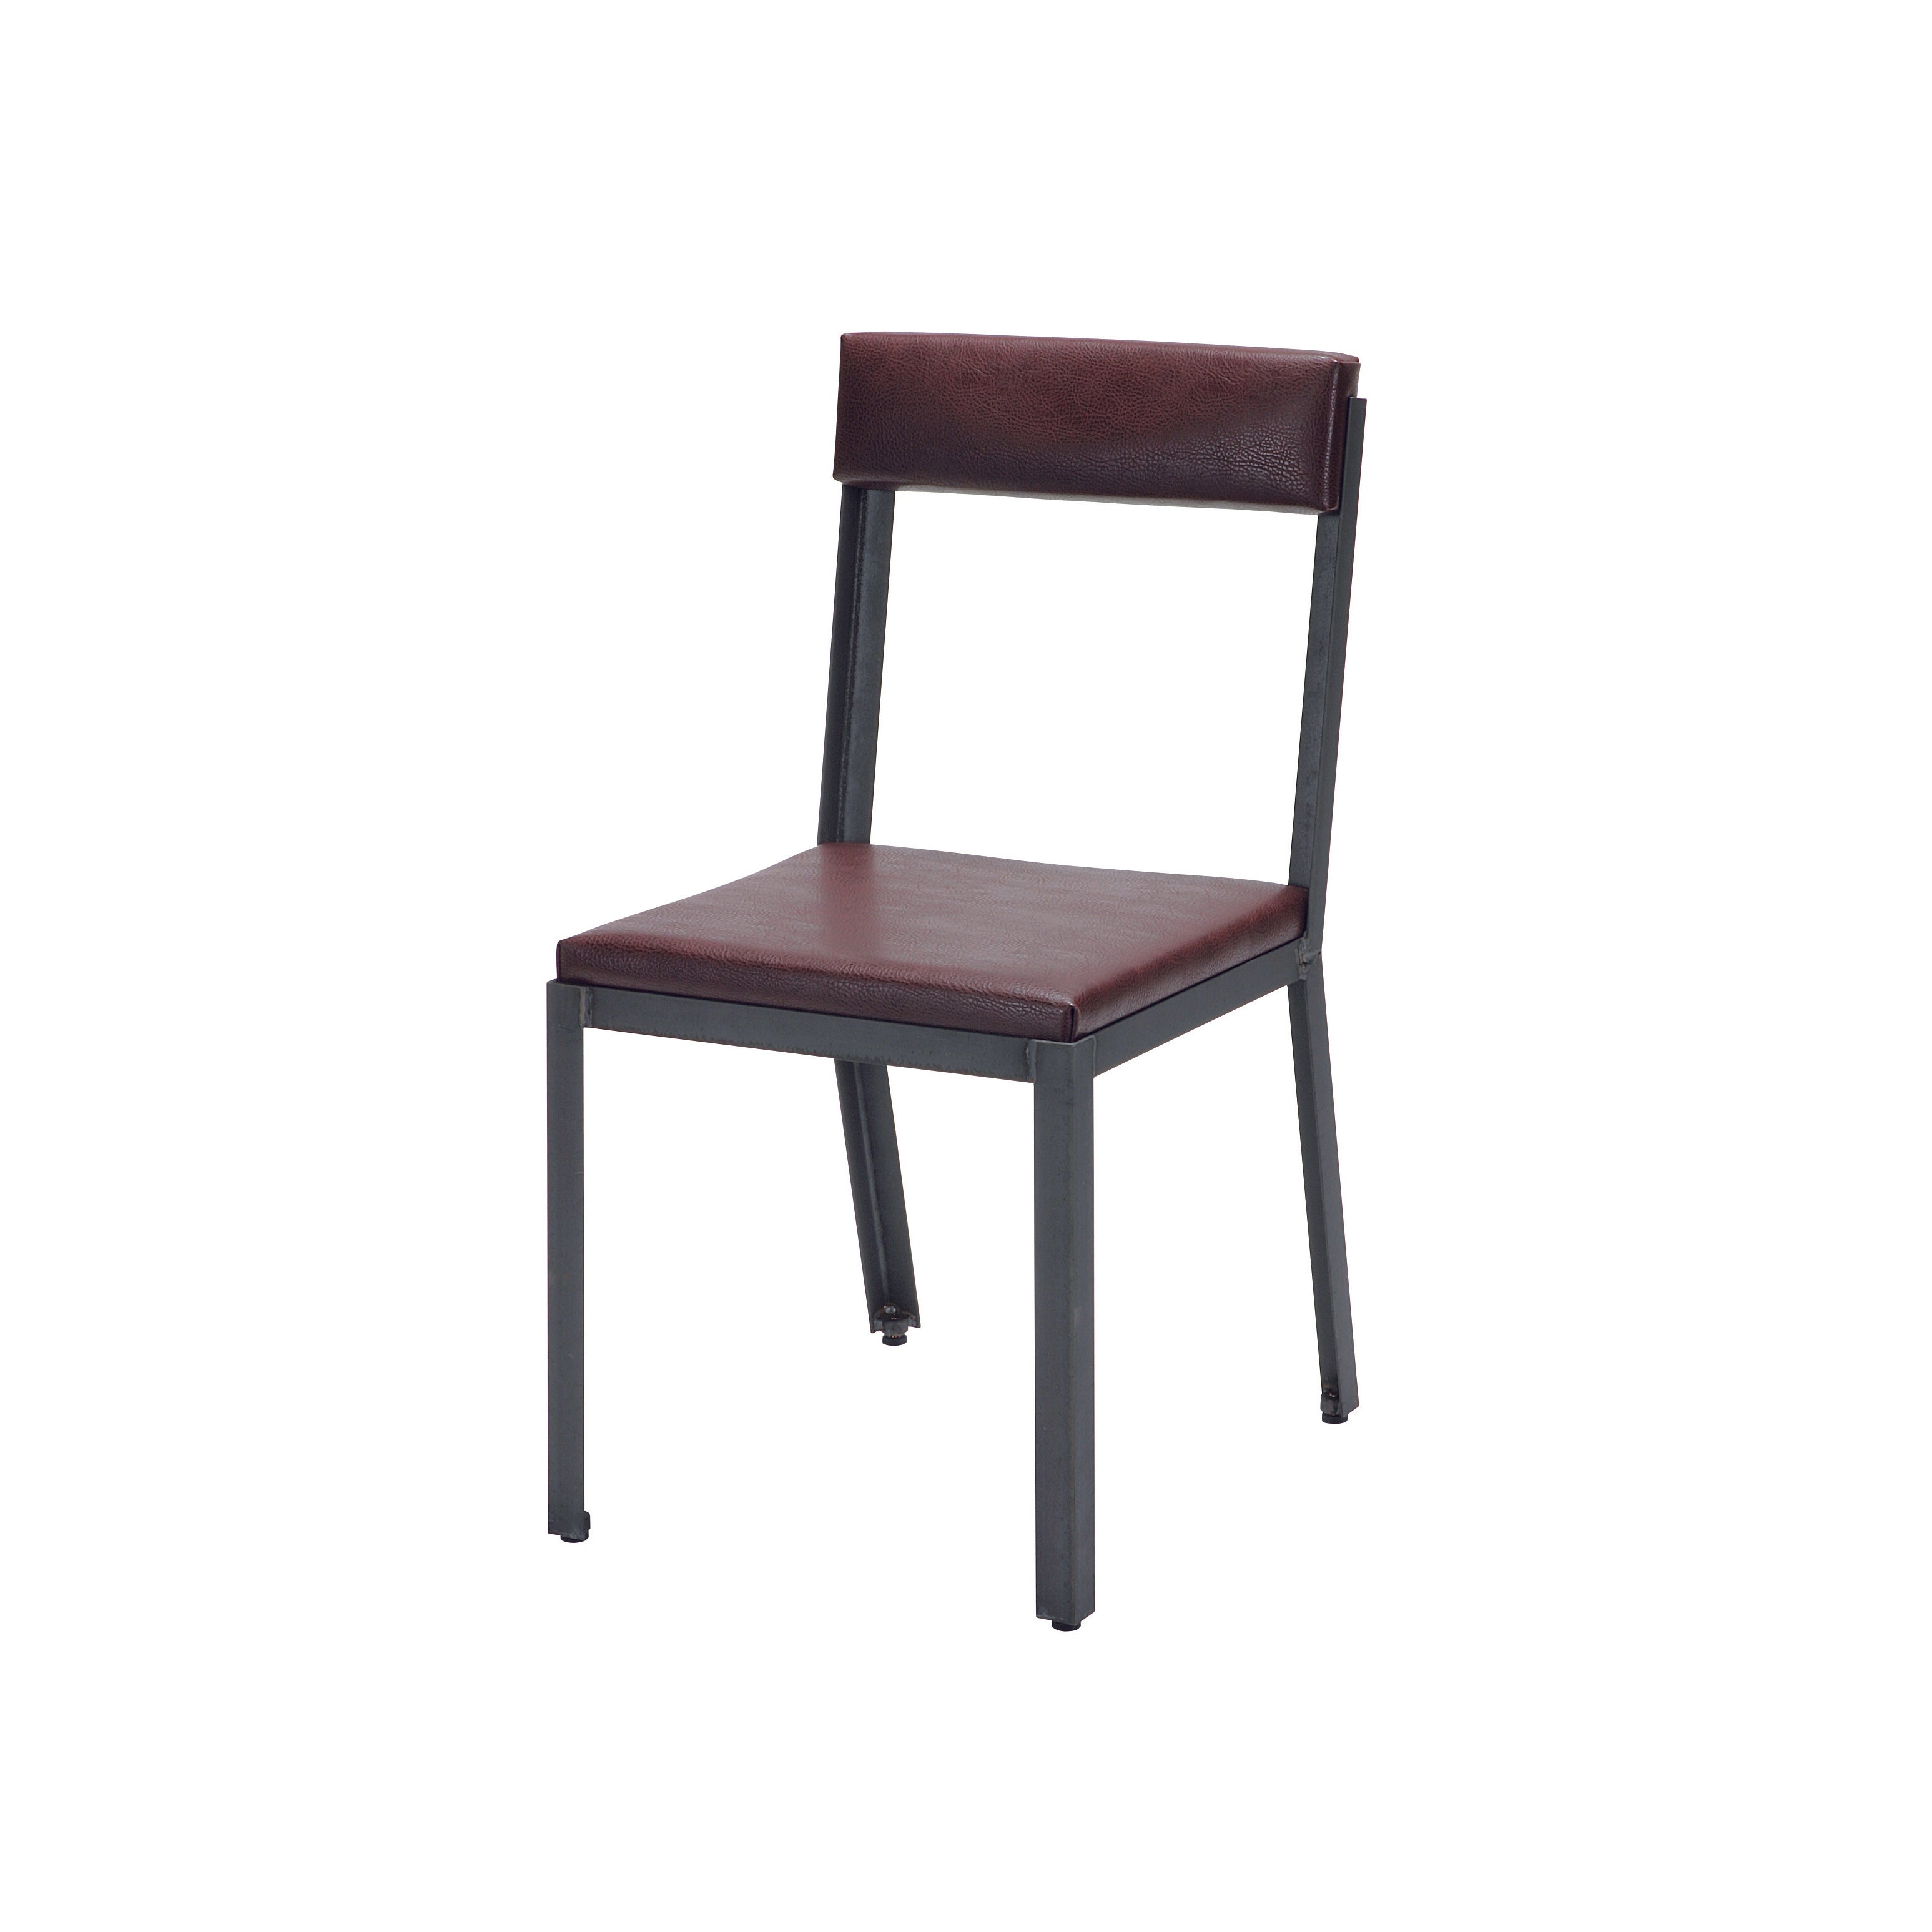 FACTORY CHAIR